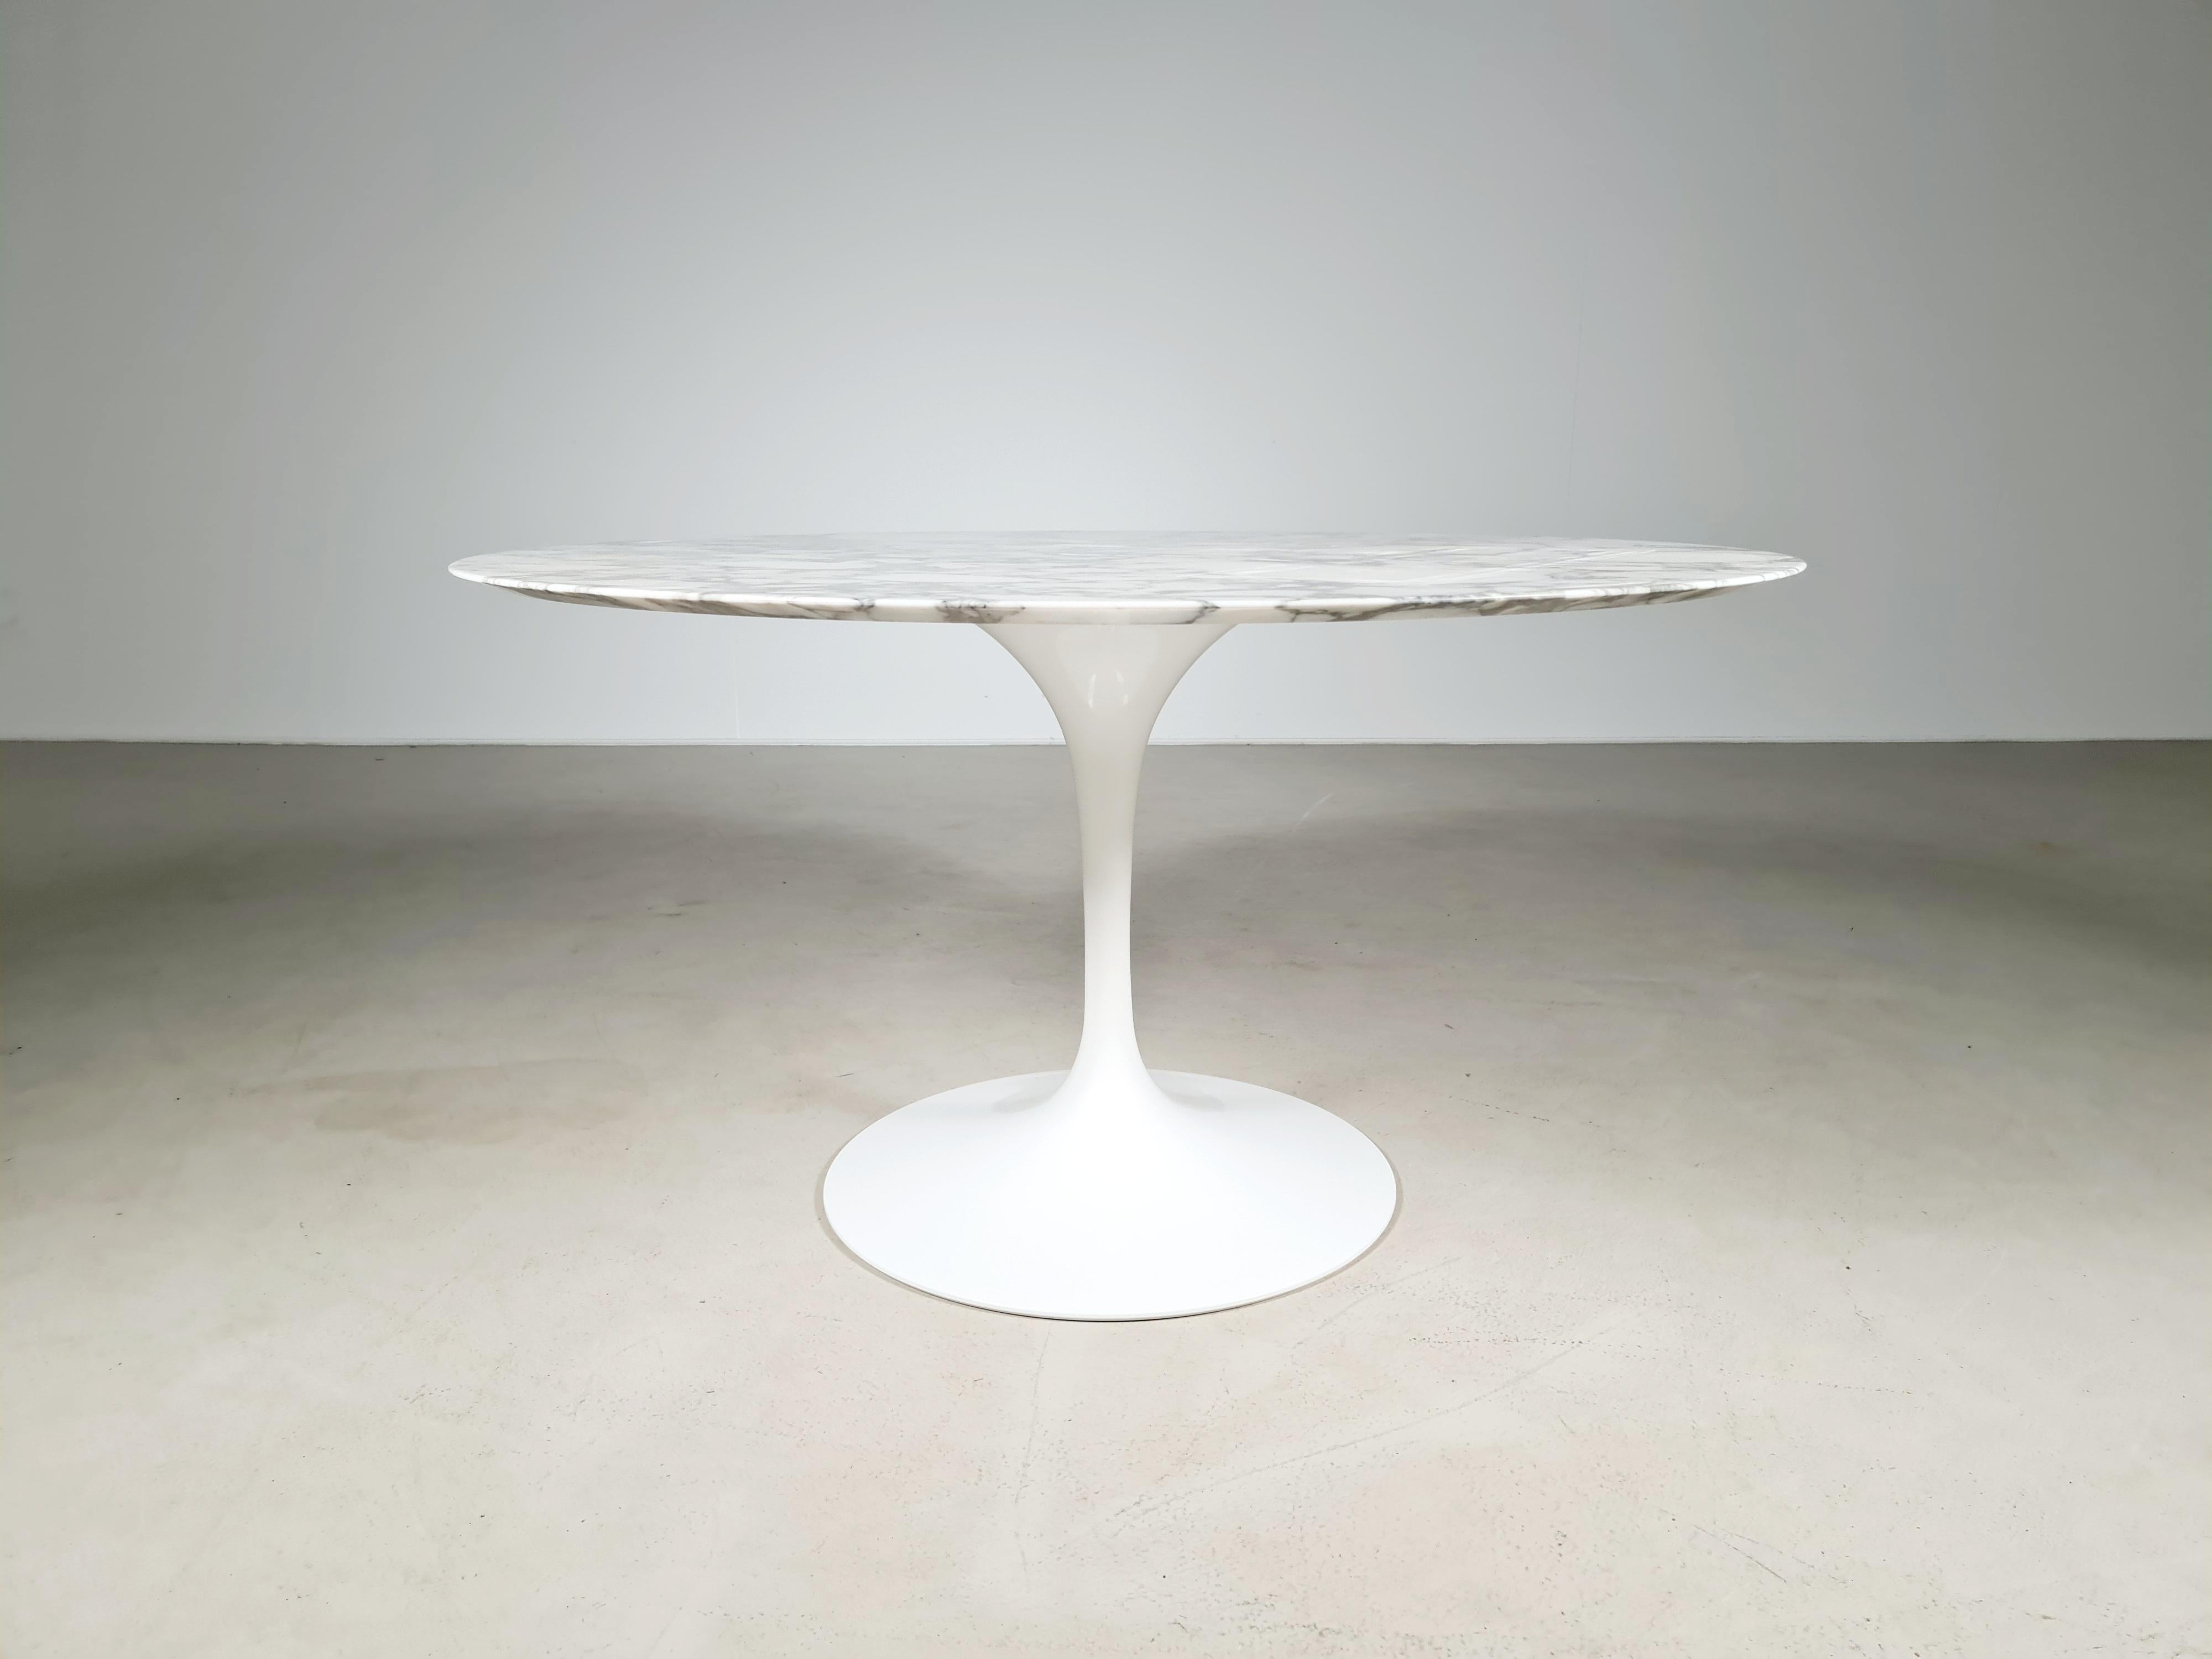 A beautiful classic table with dark grey veining and occasional subtle color variations natural to the stone on a cast-aluminum tulip pedestal base.

This is an authentic Knoll edition of the table first designed by Eero Saarinen in